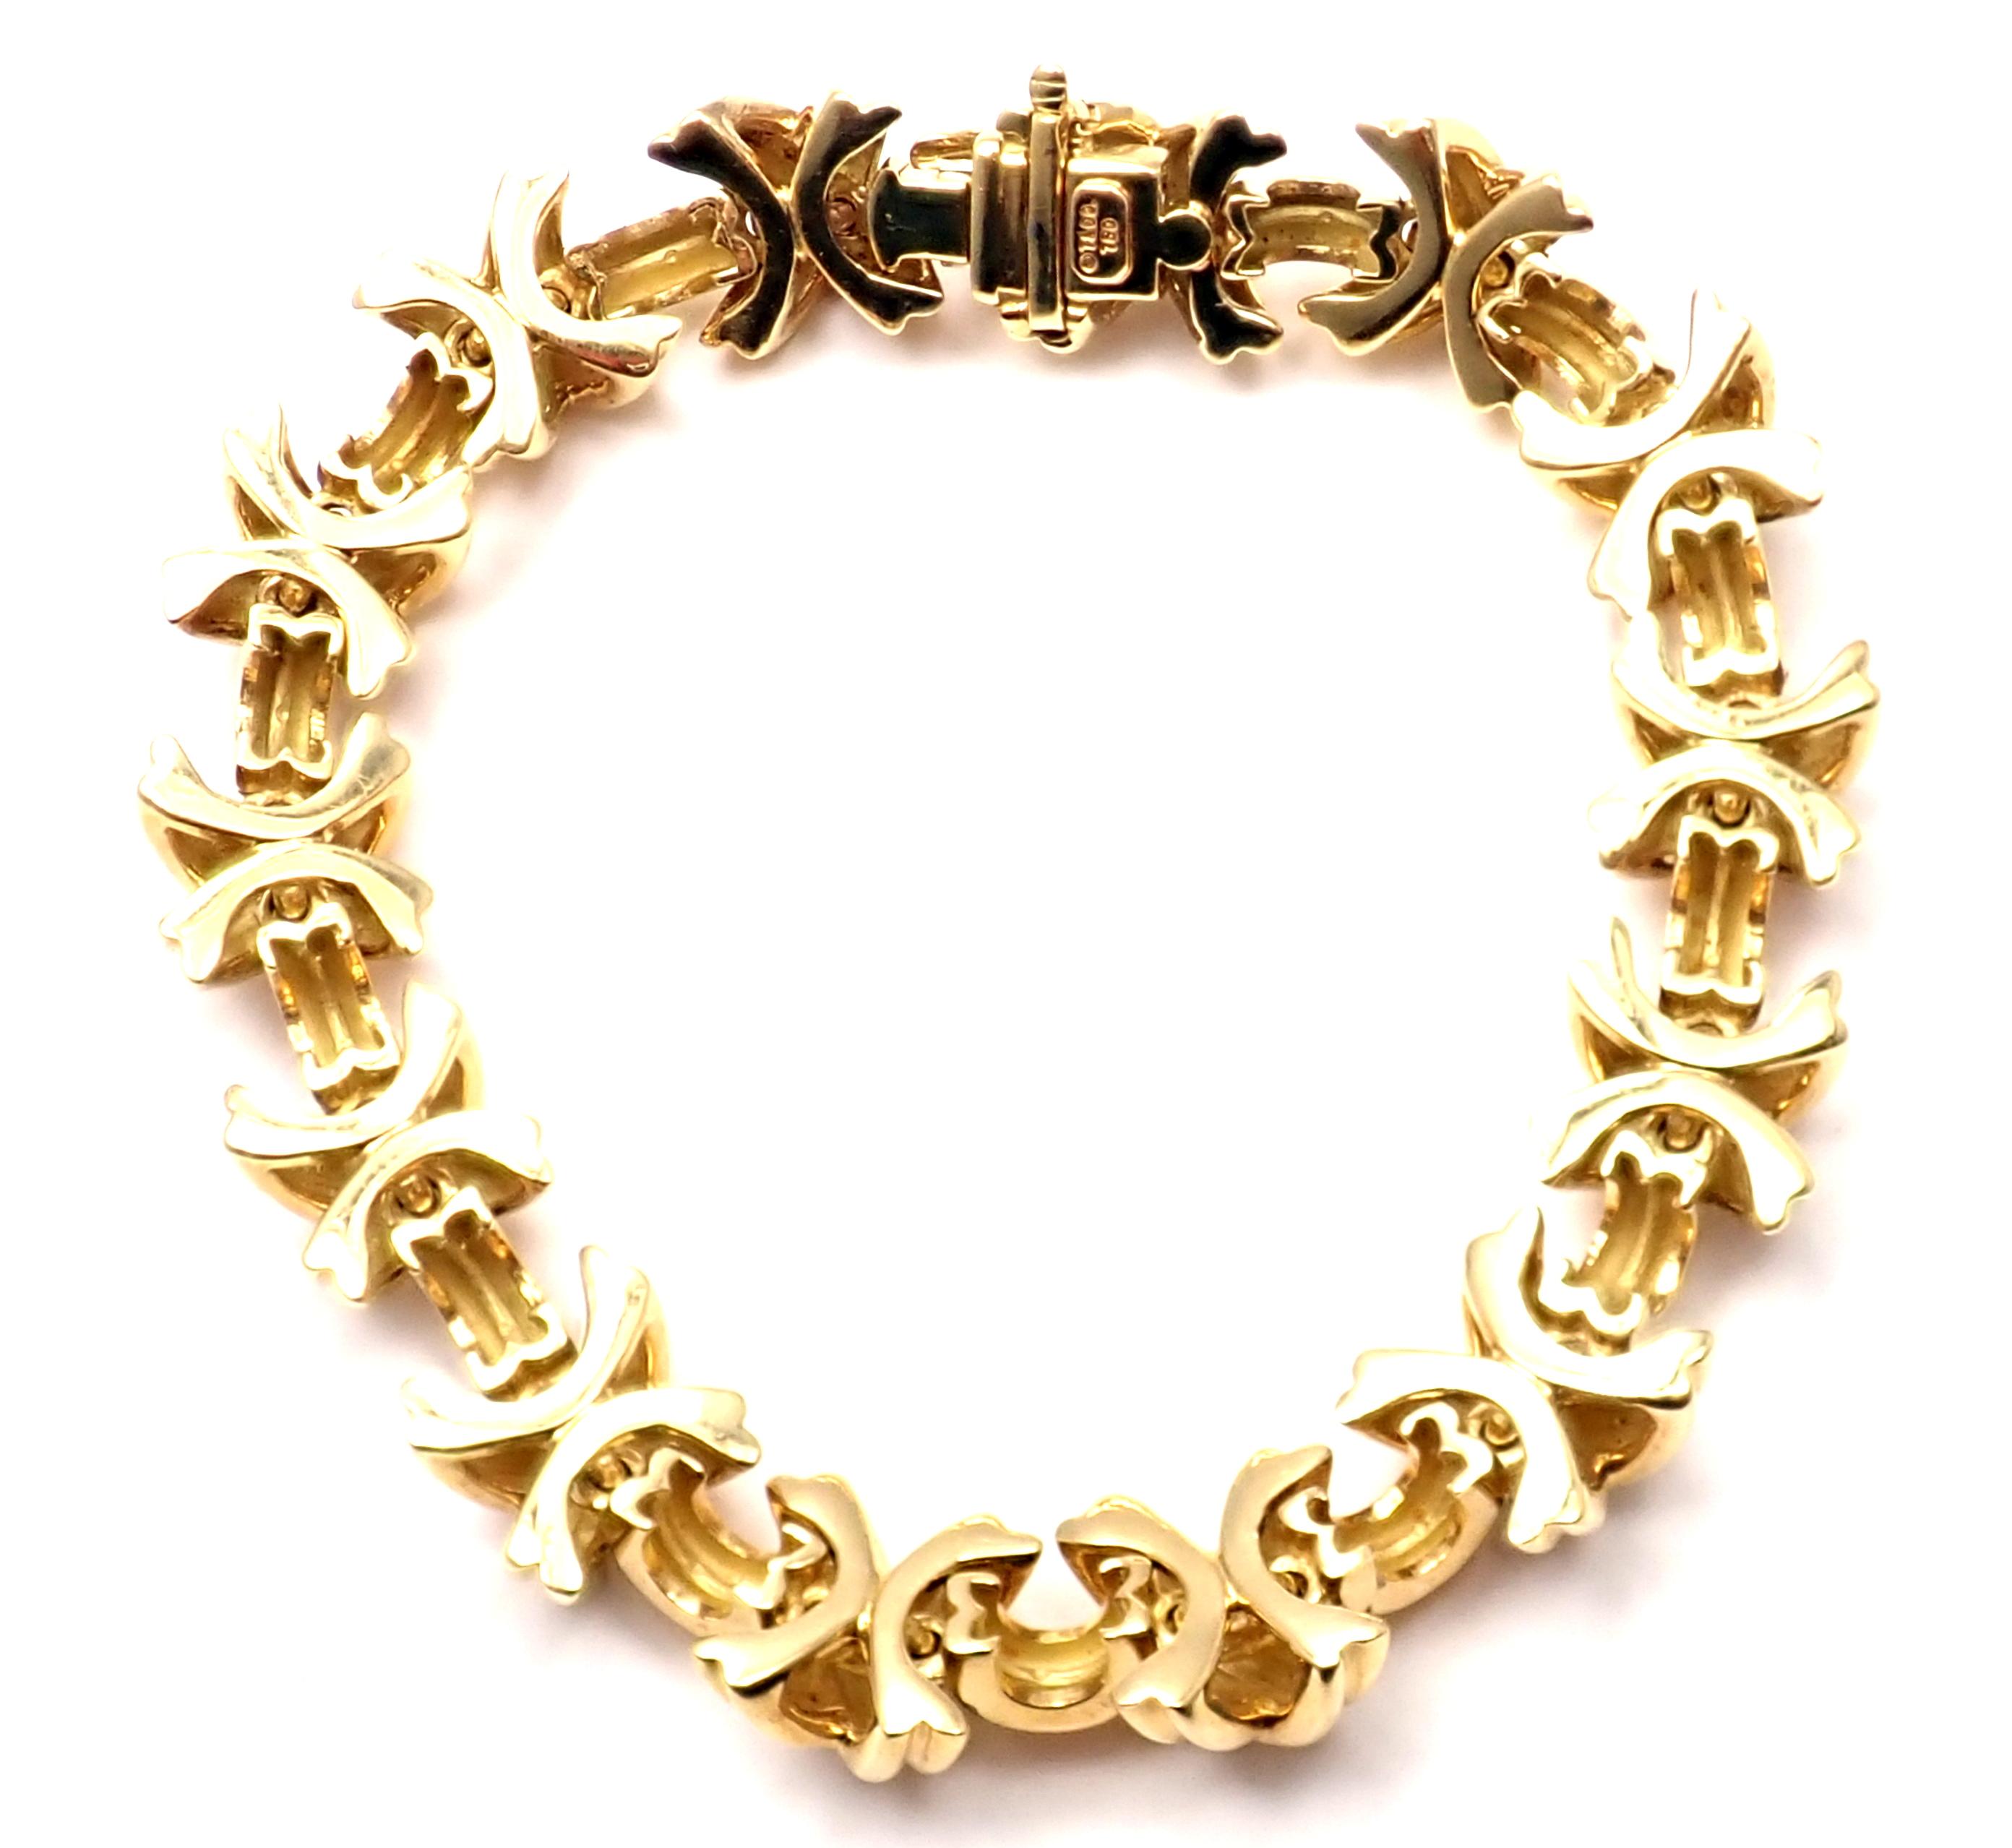 18k Yellow Gold Signature X Link Bracelet by Tiffany & Co.
Details:
Weight: 48.7 grams
Length: 7.25